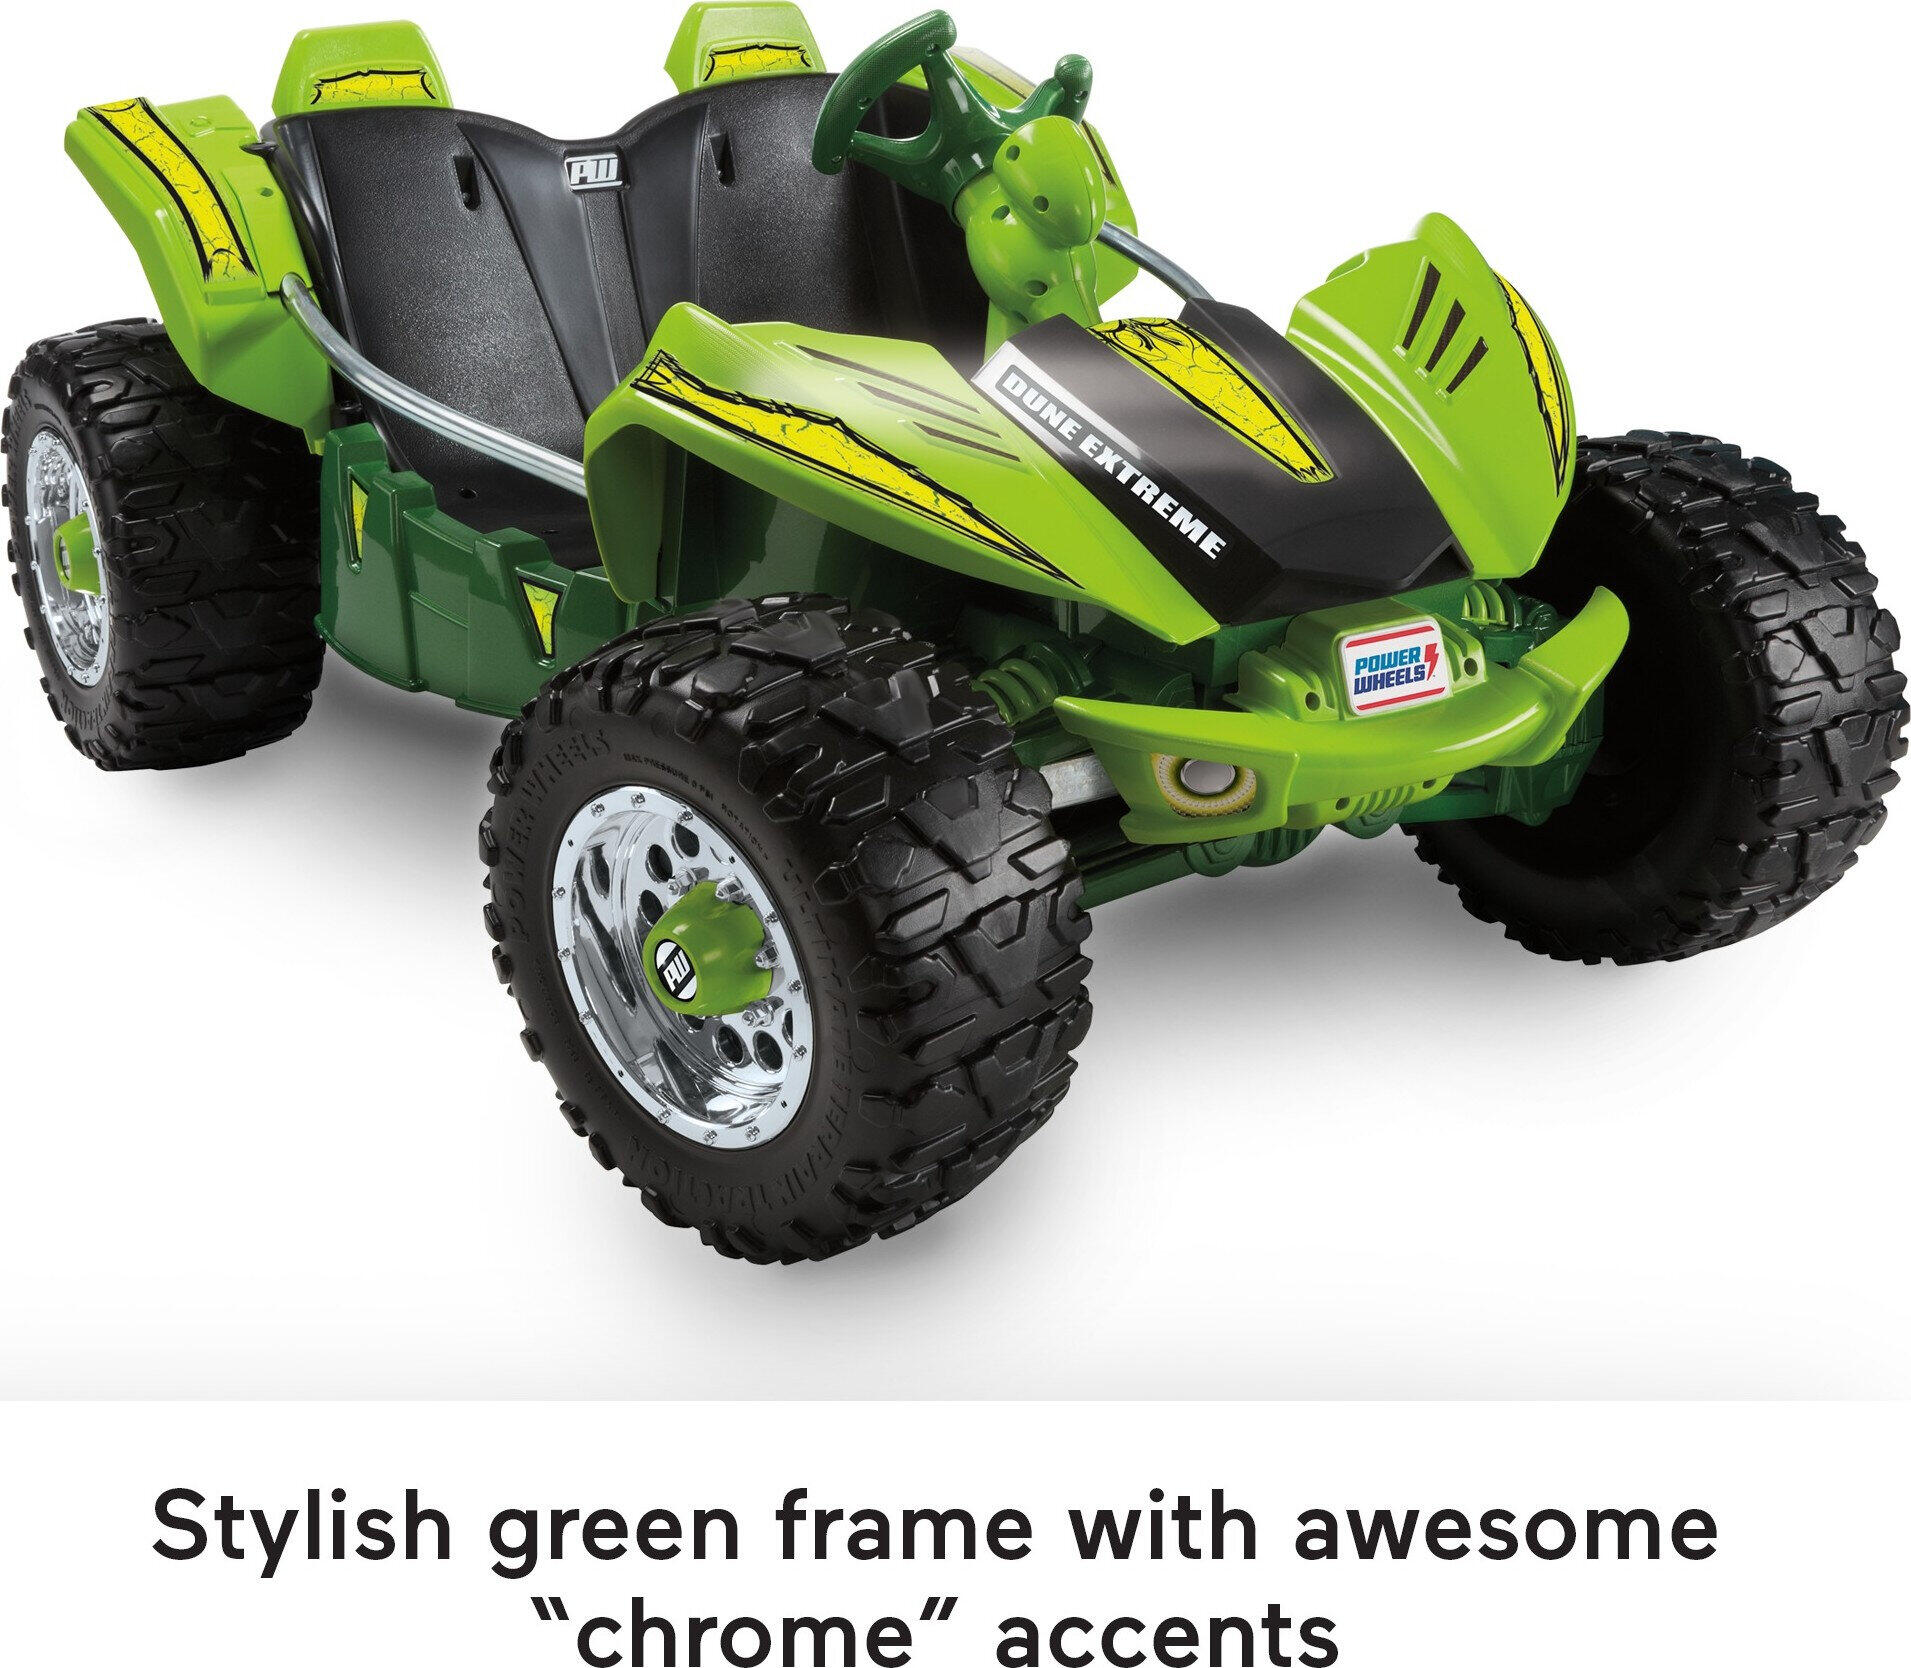 Power Wheels Dune Racer Extreme Battery-Powered Ride-on, 12 V, Max Speed: 5 mph - image 5 of 7